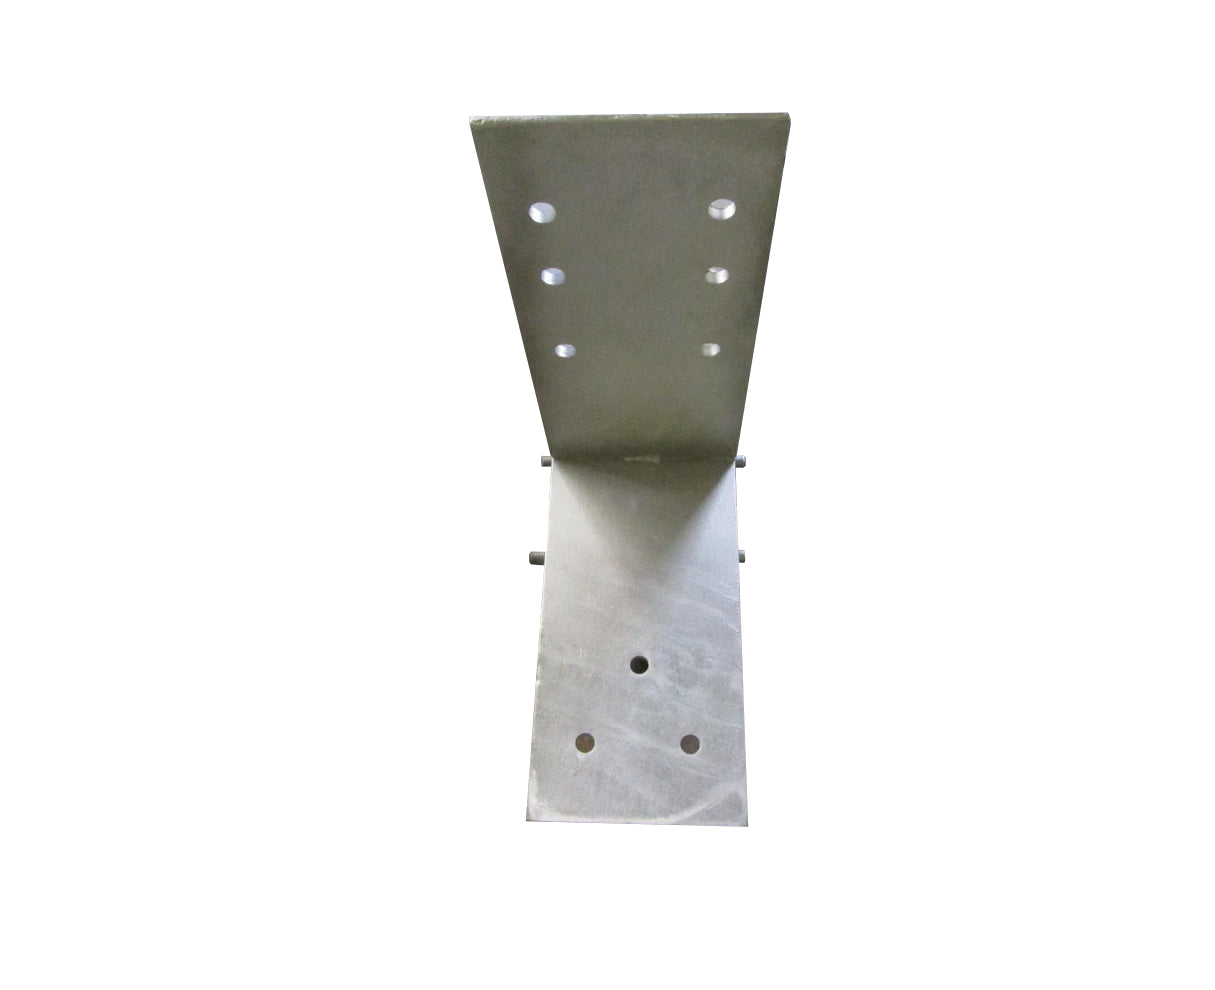 Laminated Steel Dock Bumper With Fixings - 960 x 590 x 20mm